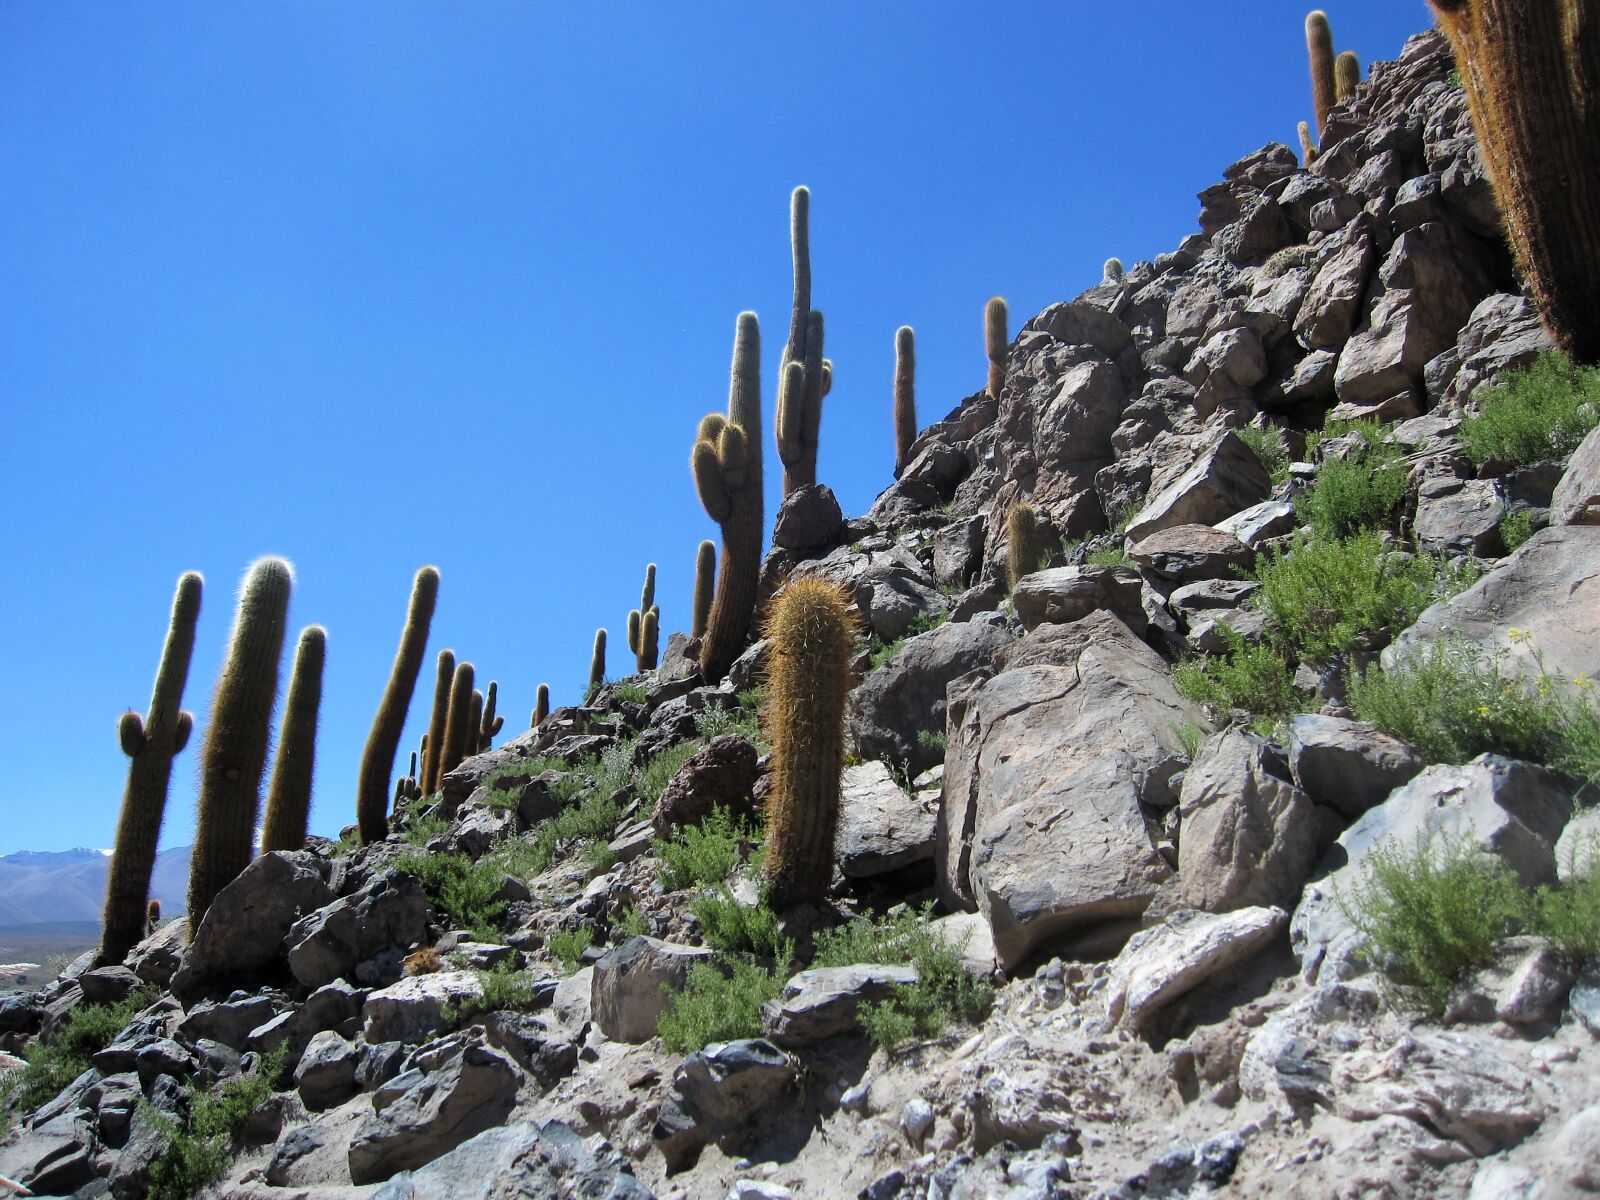 Canon PowerShot SD960 IS (Digital IXUS 110 IS / IXY Digital 510 IS) sample photo. Cacti, chile, southamerica photography